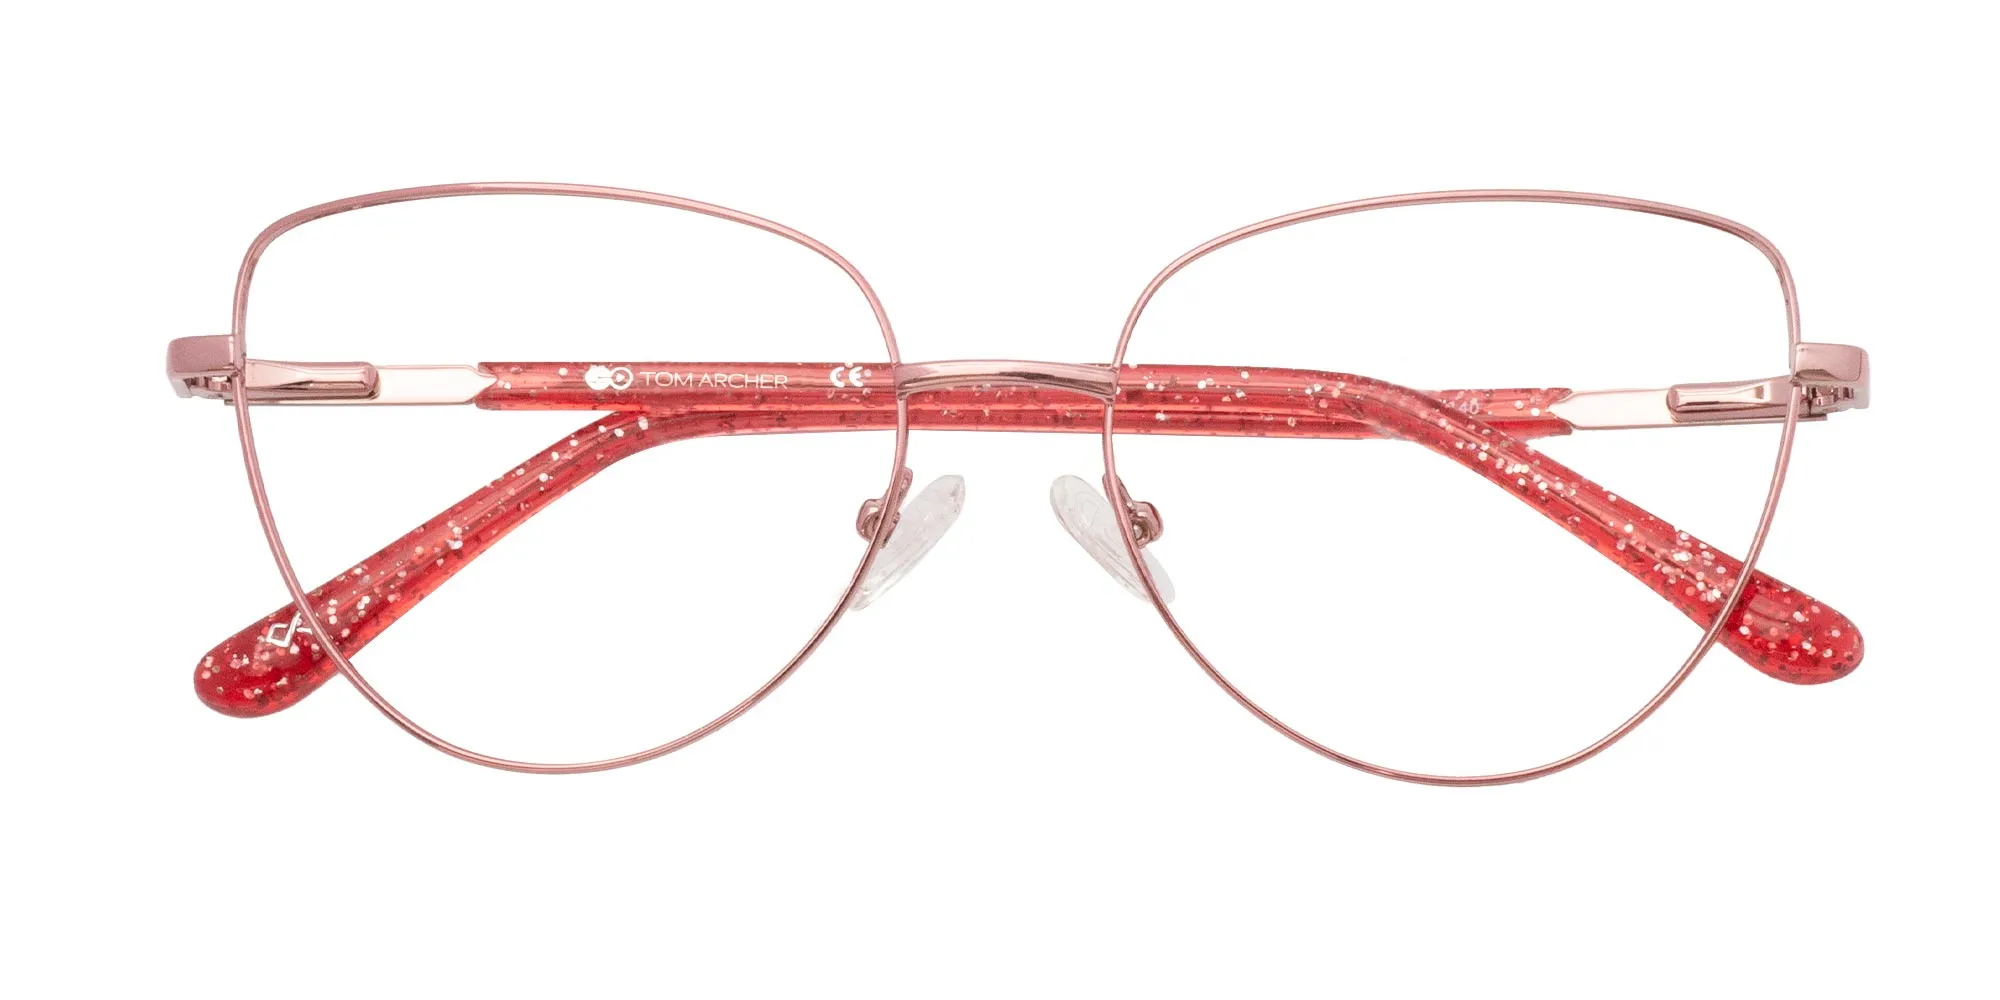 Fashionable Spectacles For Ladies-2